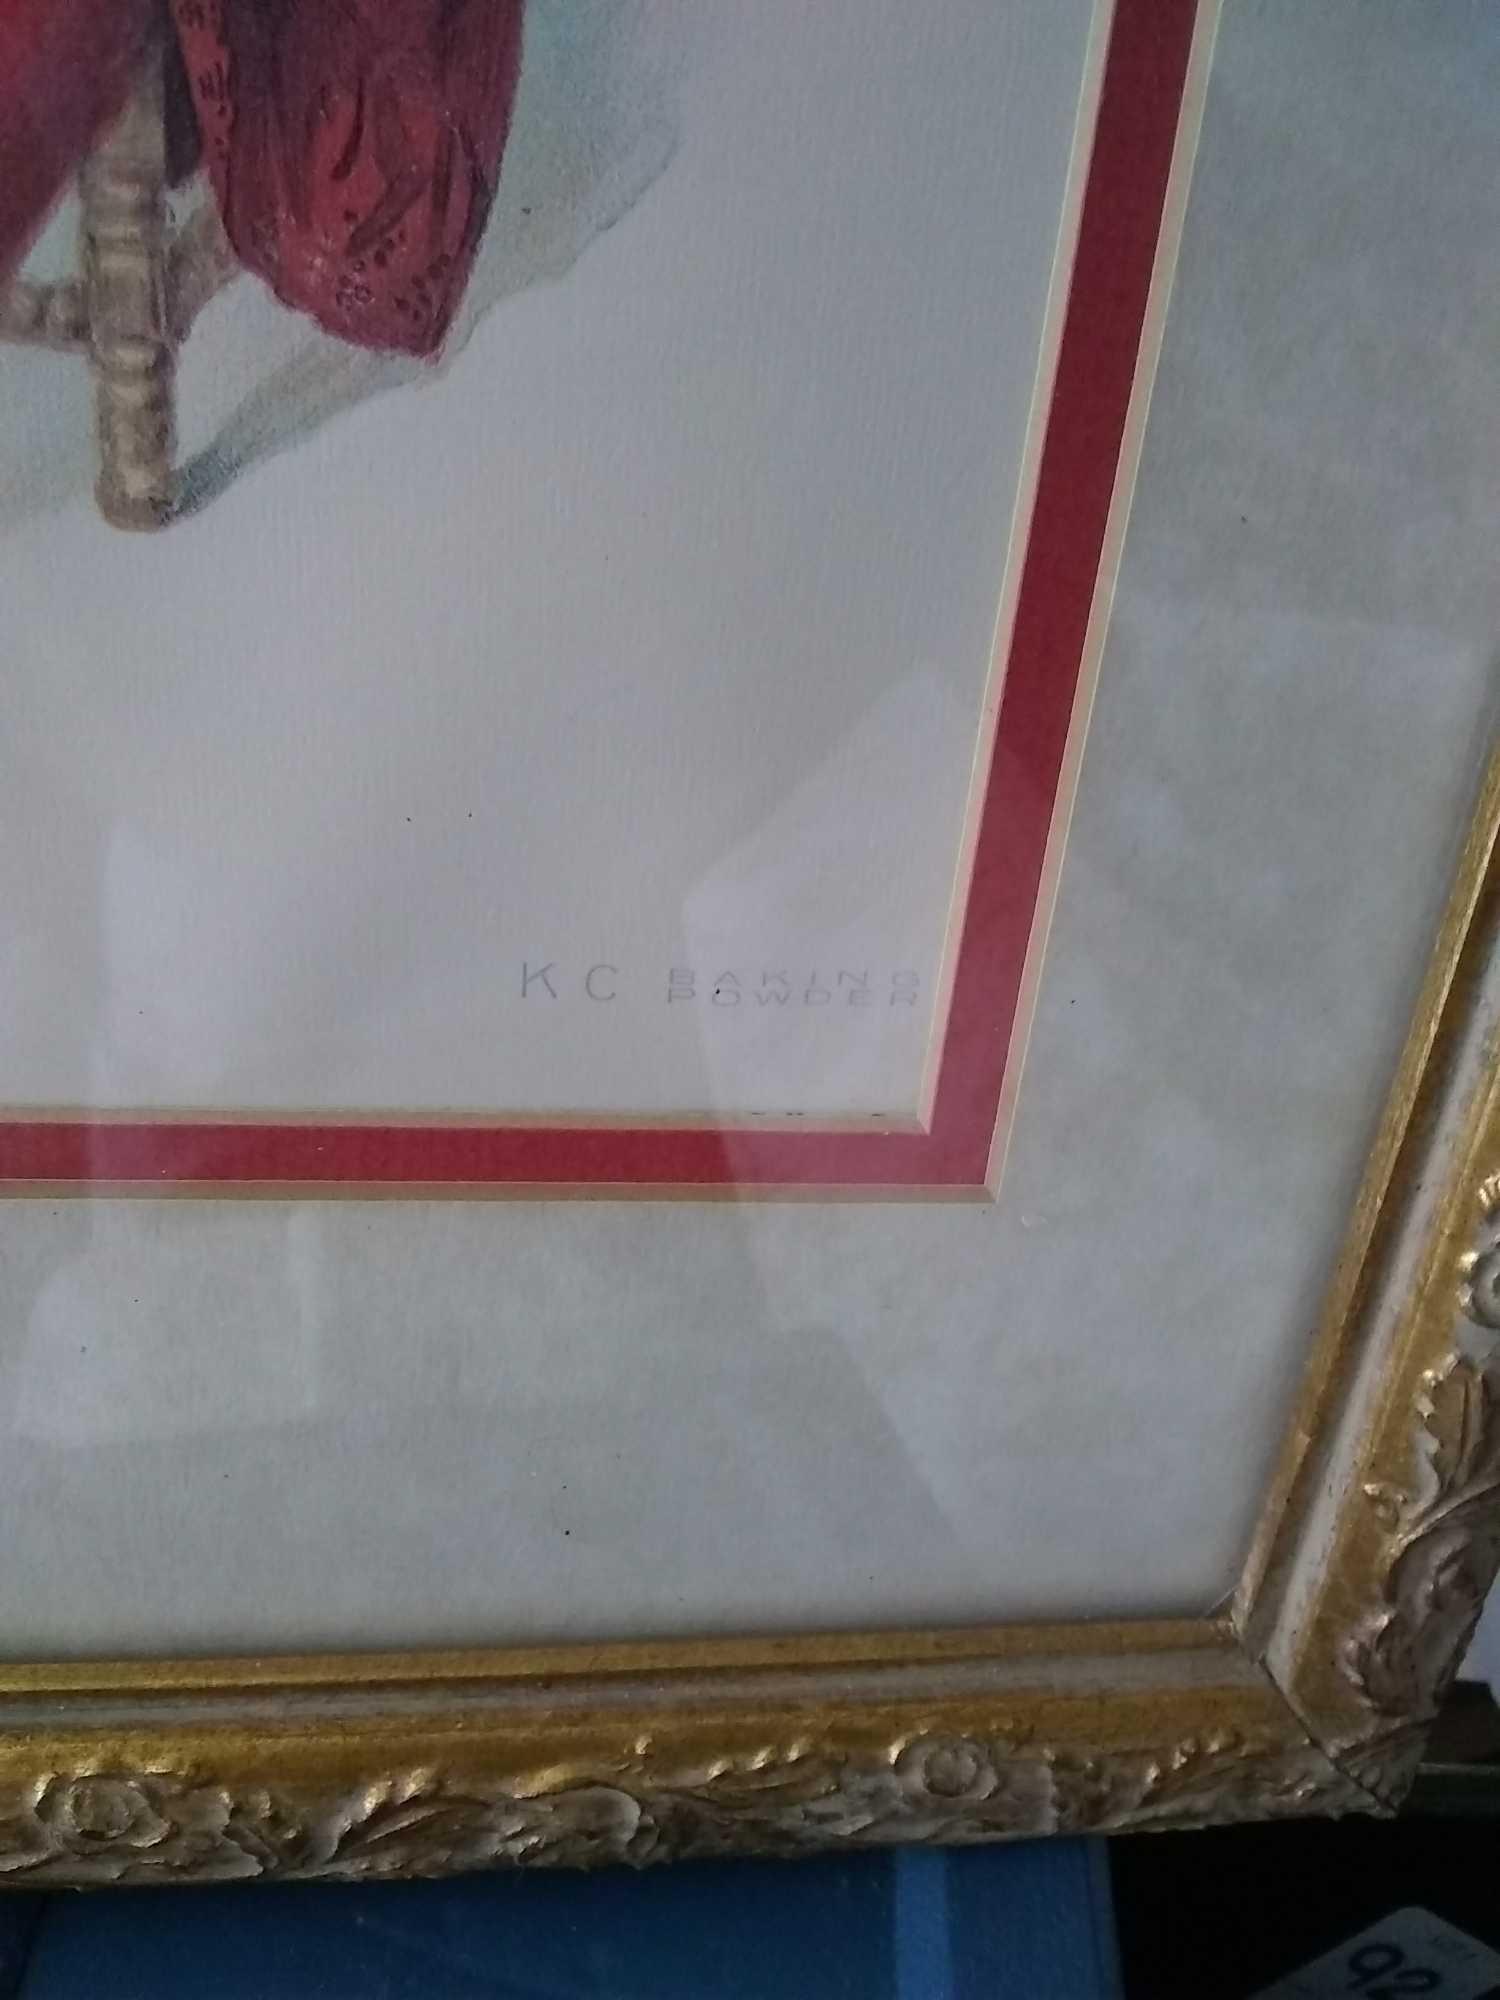 Framed art labeled KC baking powder shown in the picture